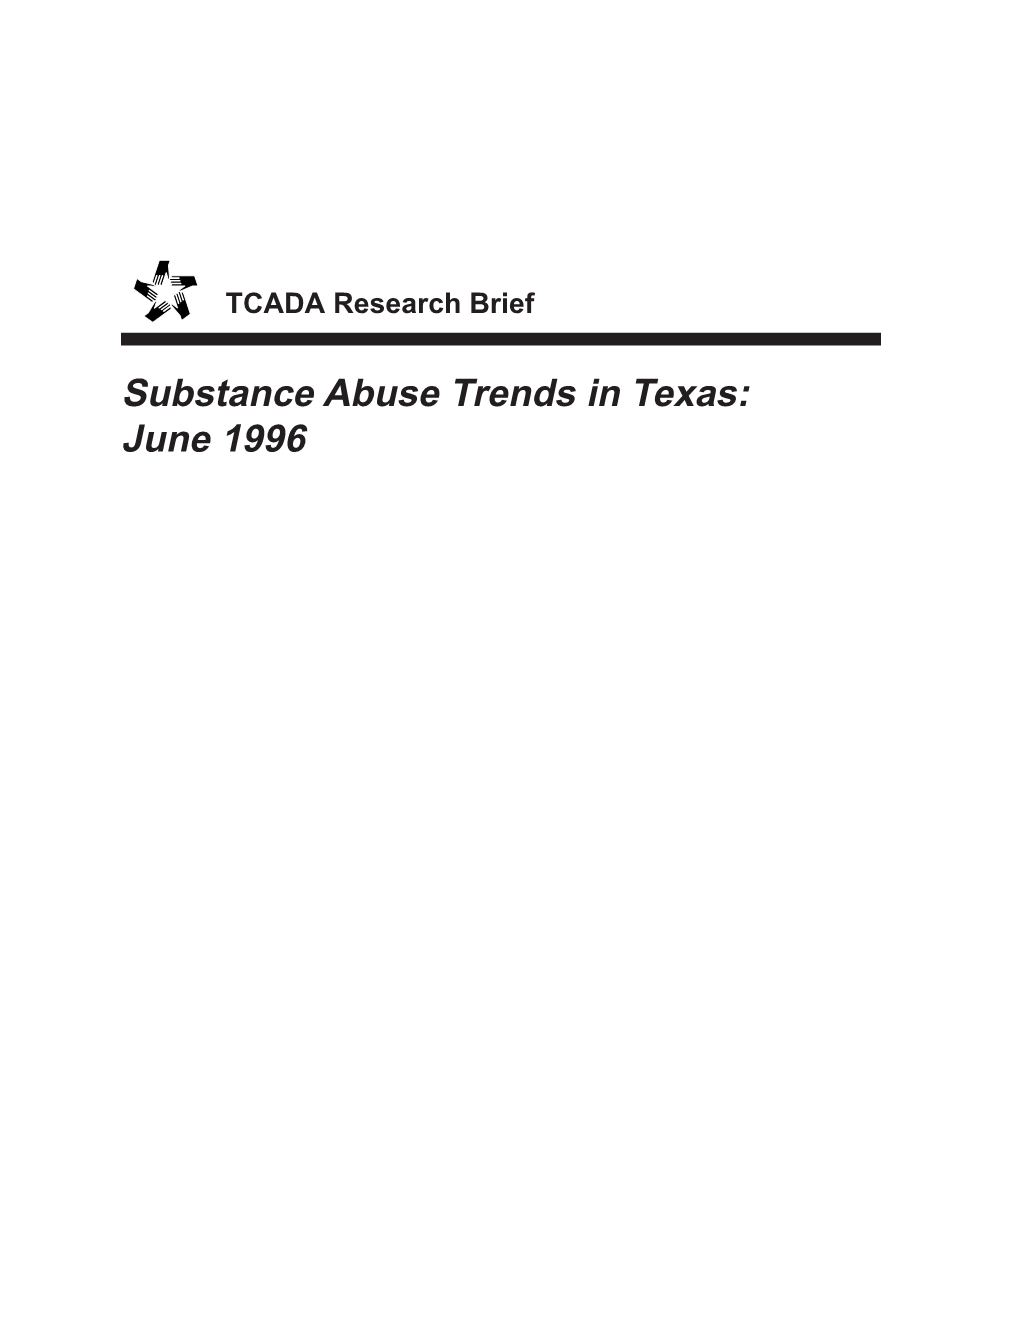 Substance Abuse Trends in Texas: June 1996 by Jane C